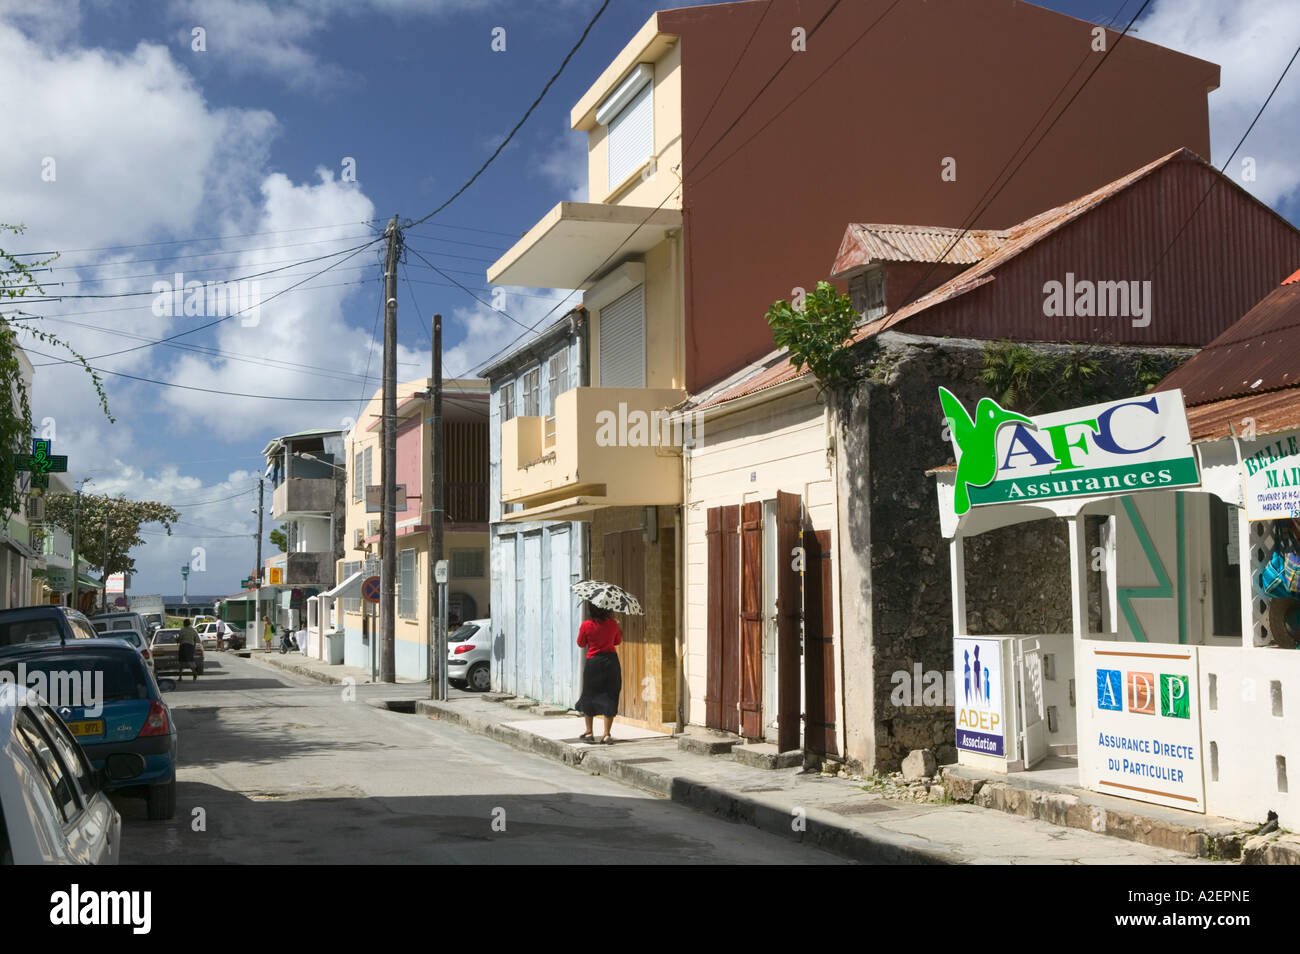 French West Indies, Guadalupa, Marie Galante, Isola, GRAND, BOURG: architettura coloniale con pedonale (NR) Foto Stock